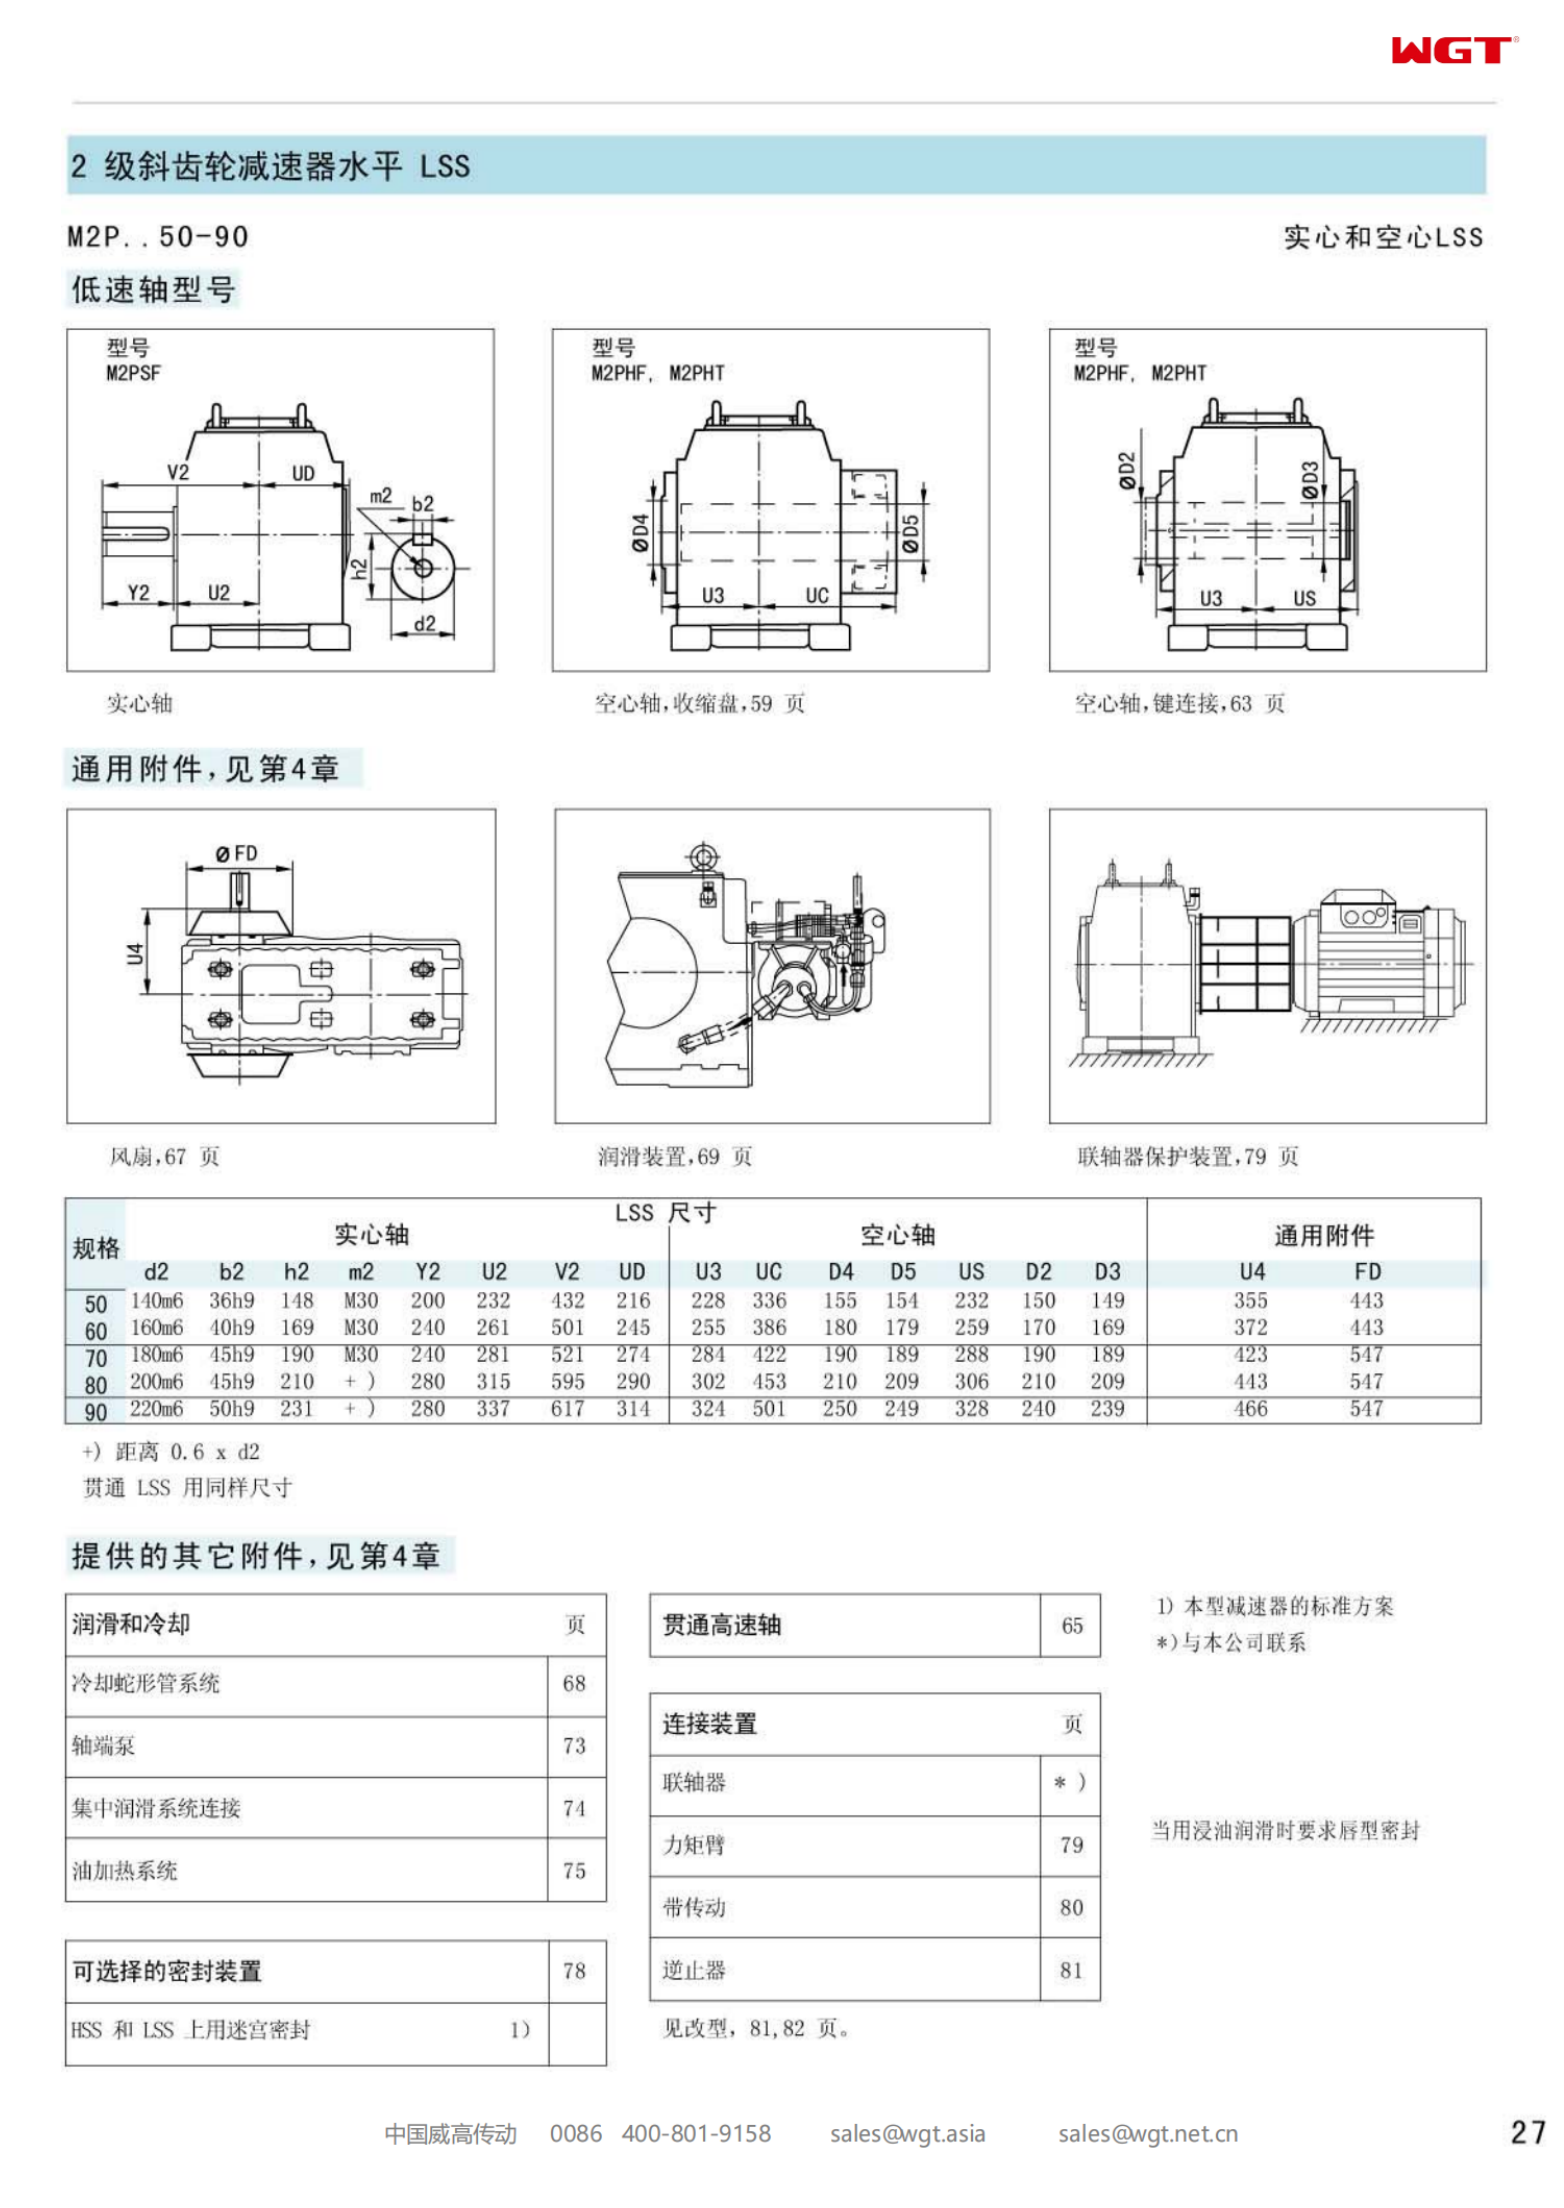 M2PHF80 Replace_SEW_M_Series Gearbox